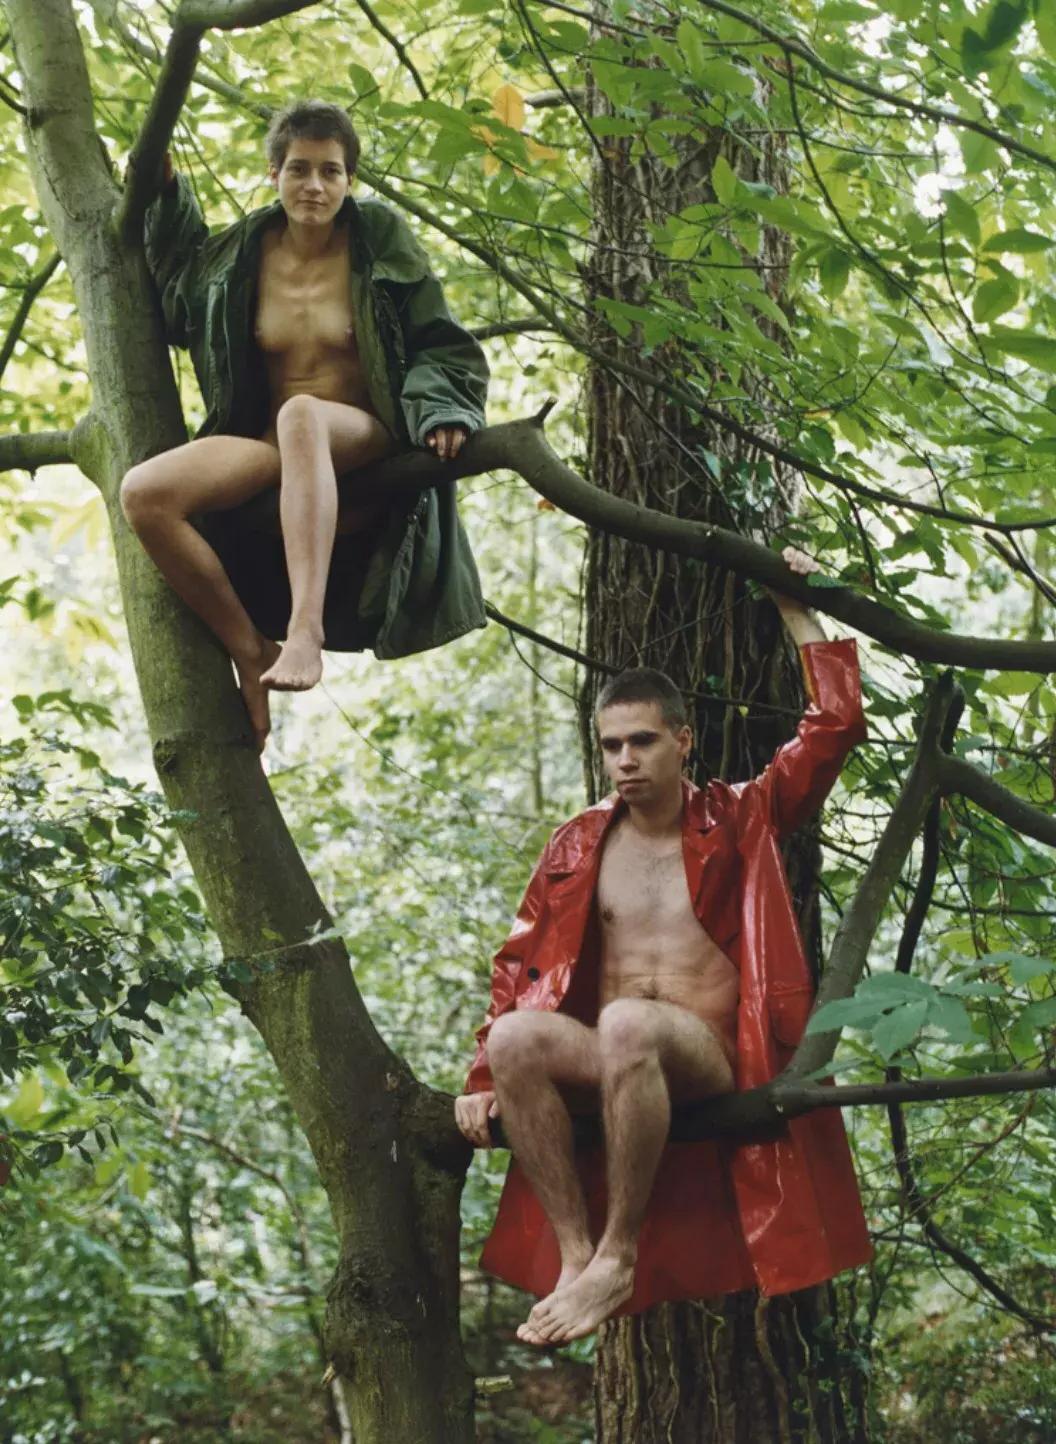 Wolfgang Tillmans, 1992, Lutz & Alex sitting in the trees